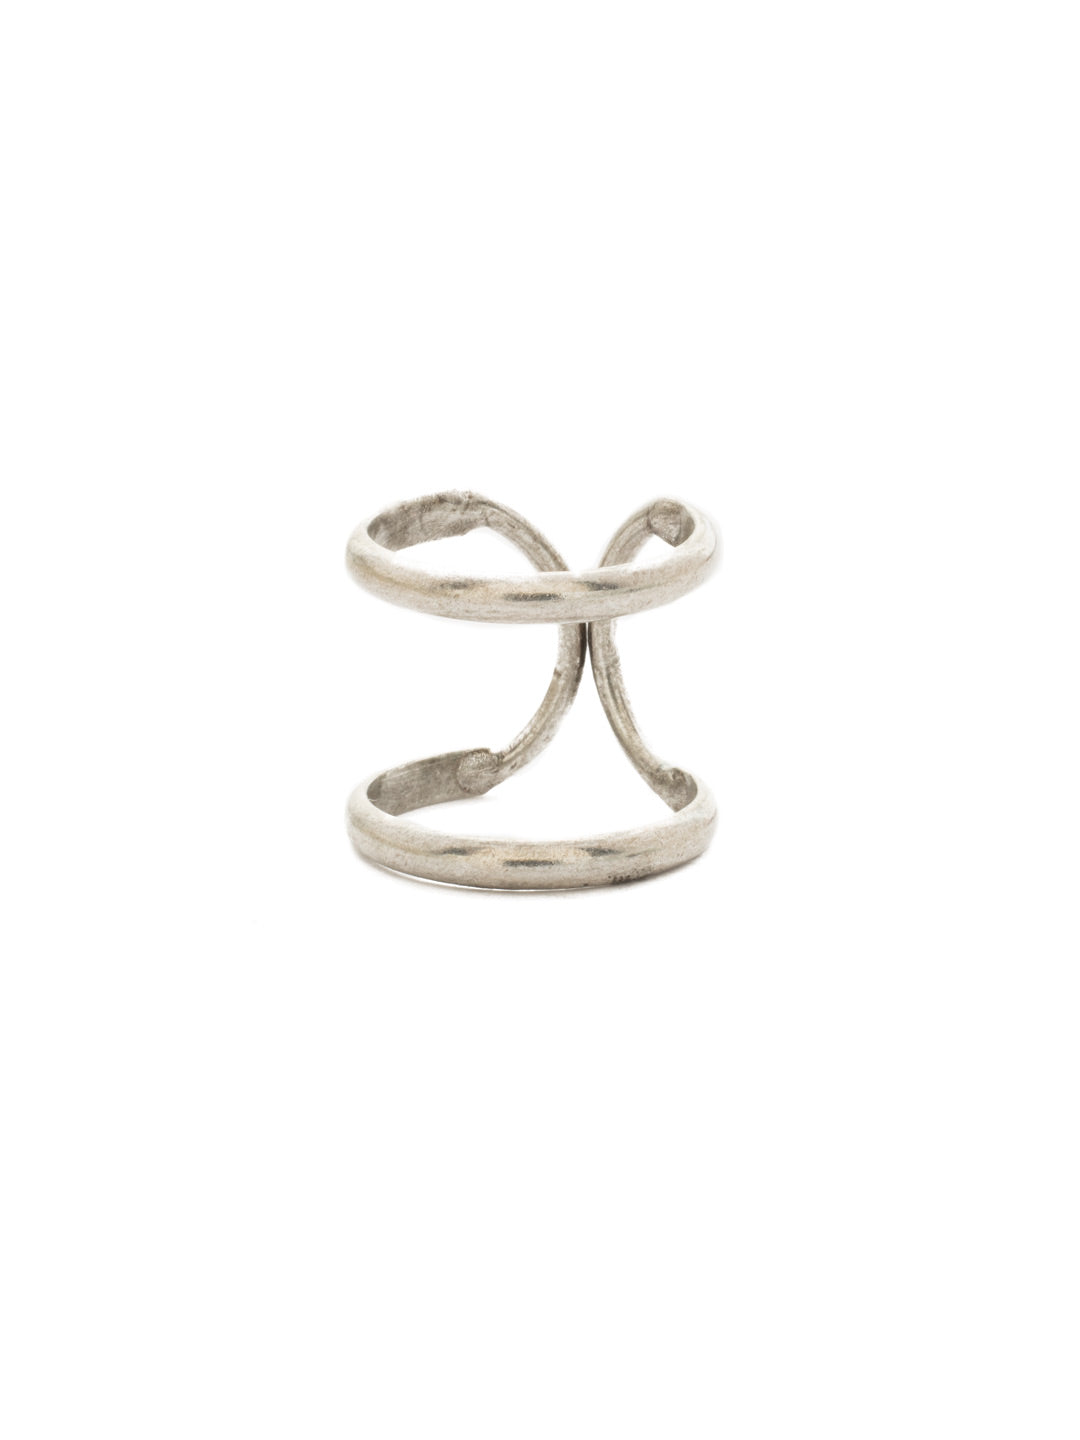 Running In Circles Stacked Ring - RDW3ASCRY